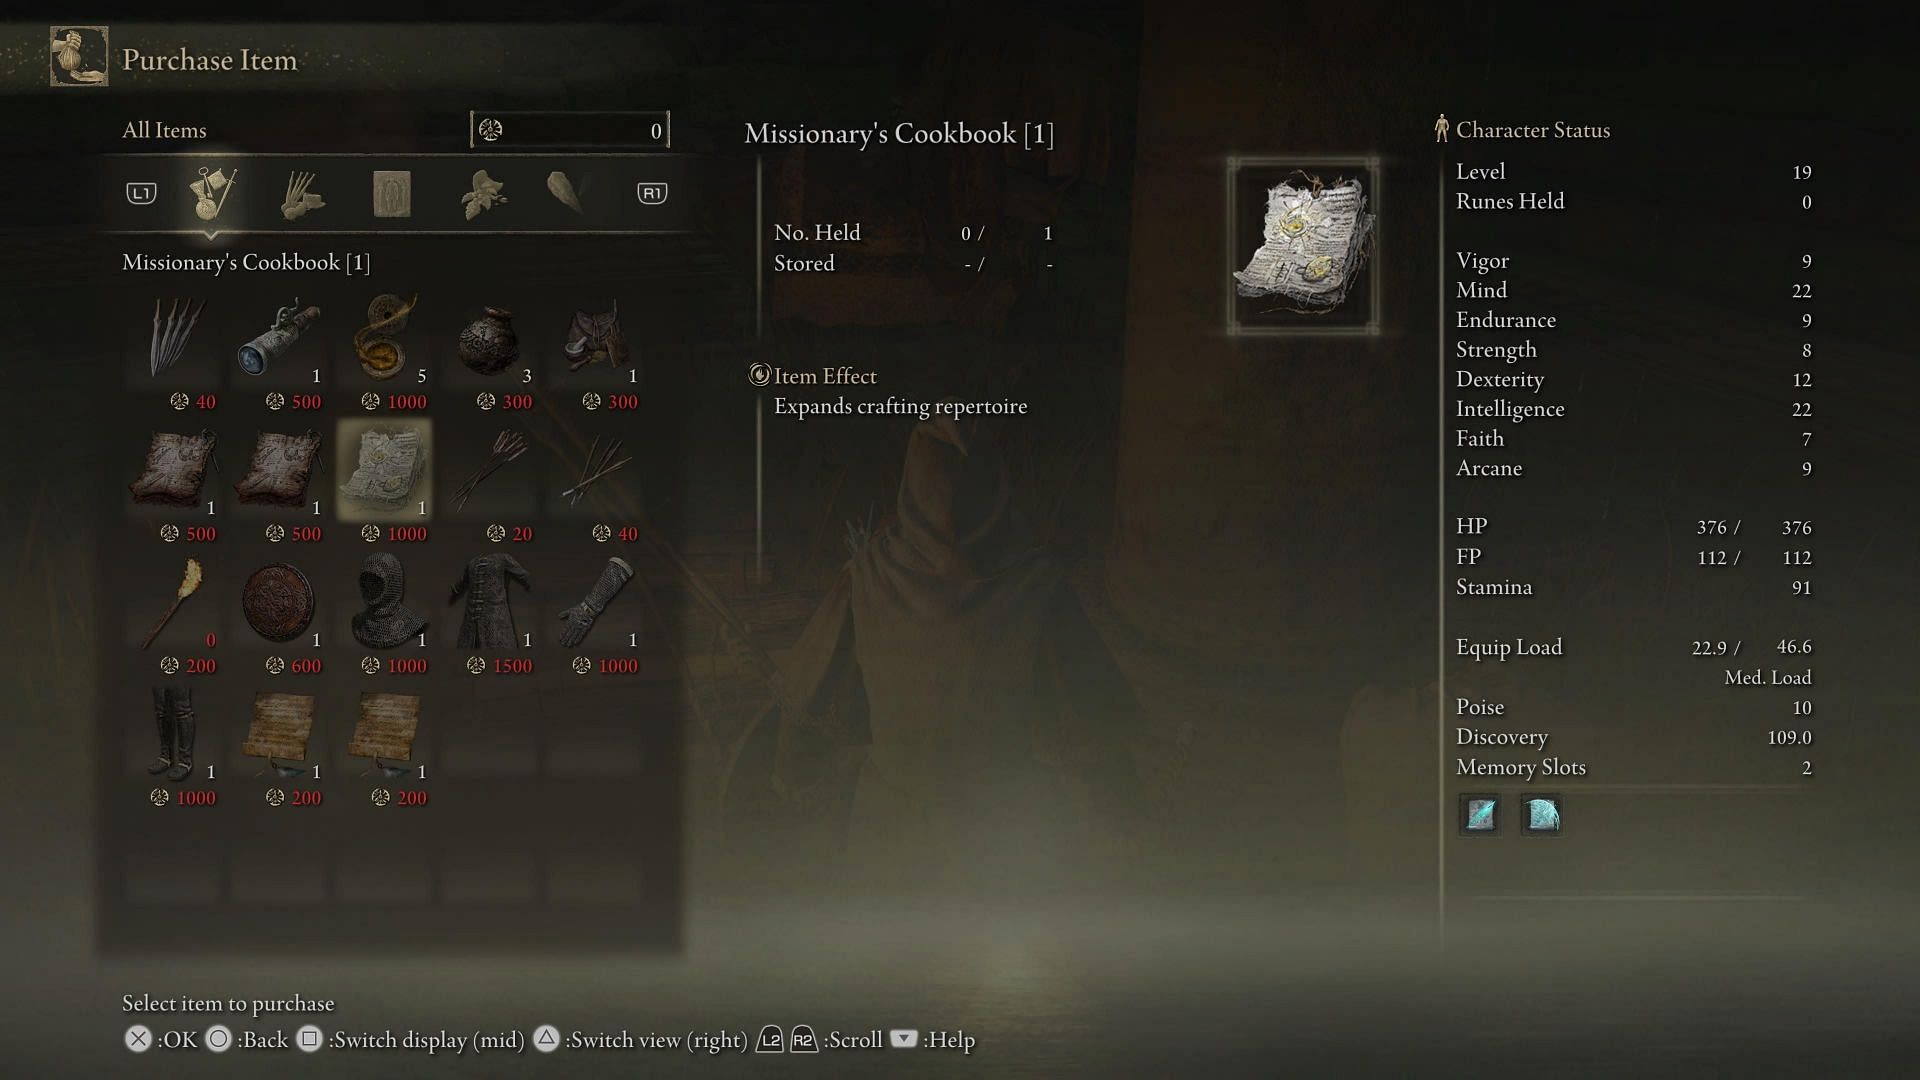 Purchasing the Missionary&#039;s Cookbook (1) will cost the player 1000 runes. Image via Elden Ring.